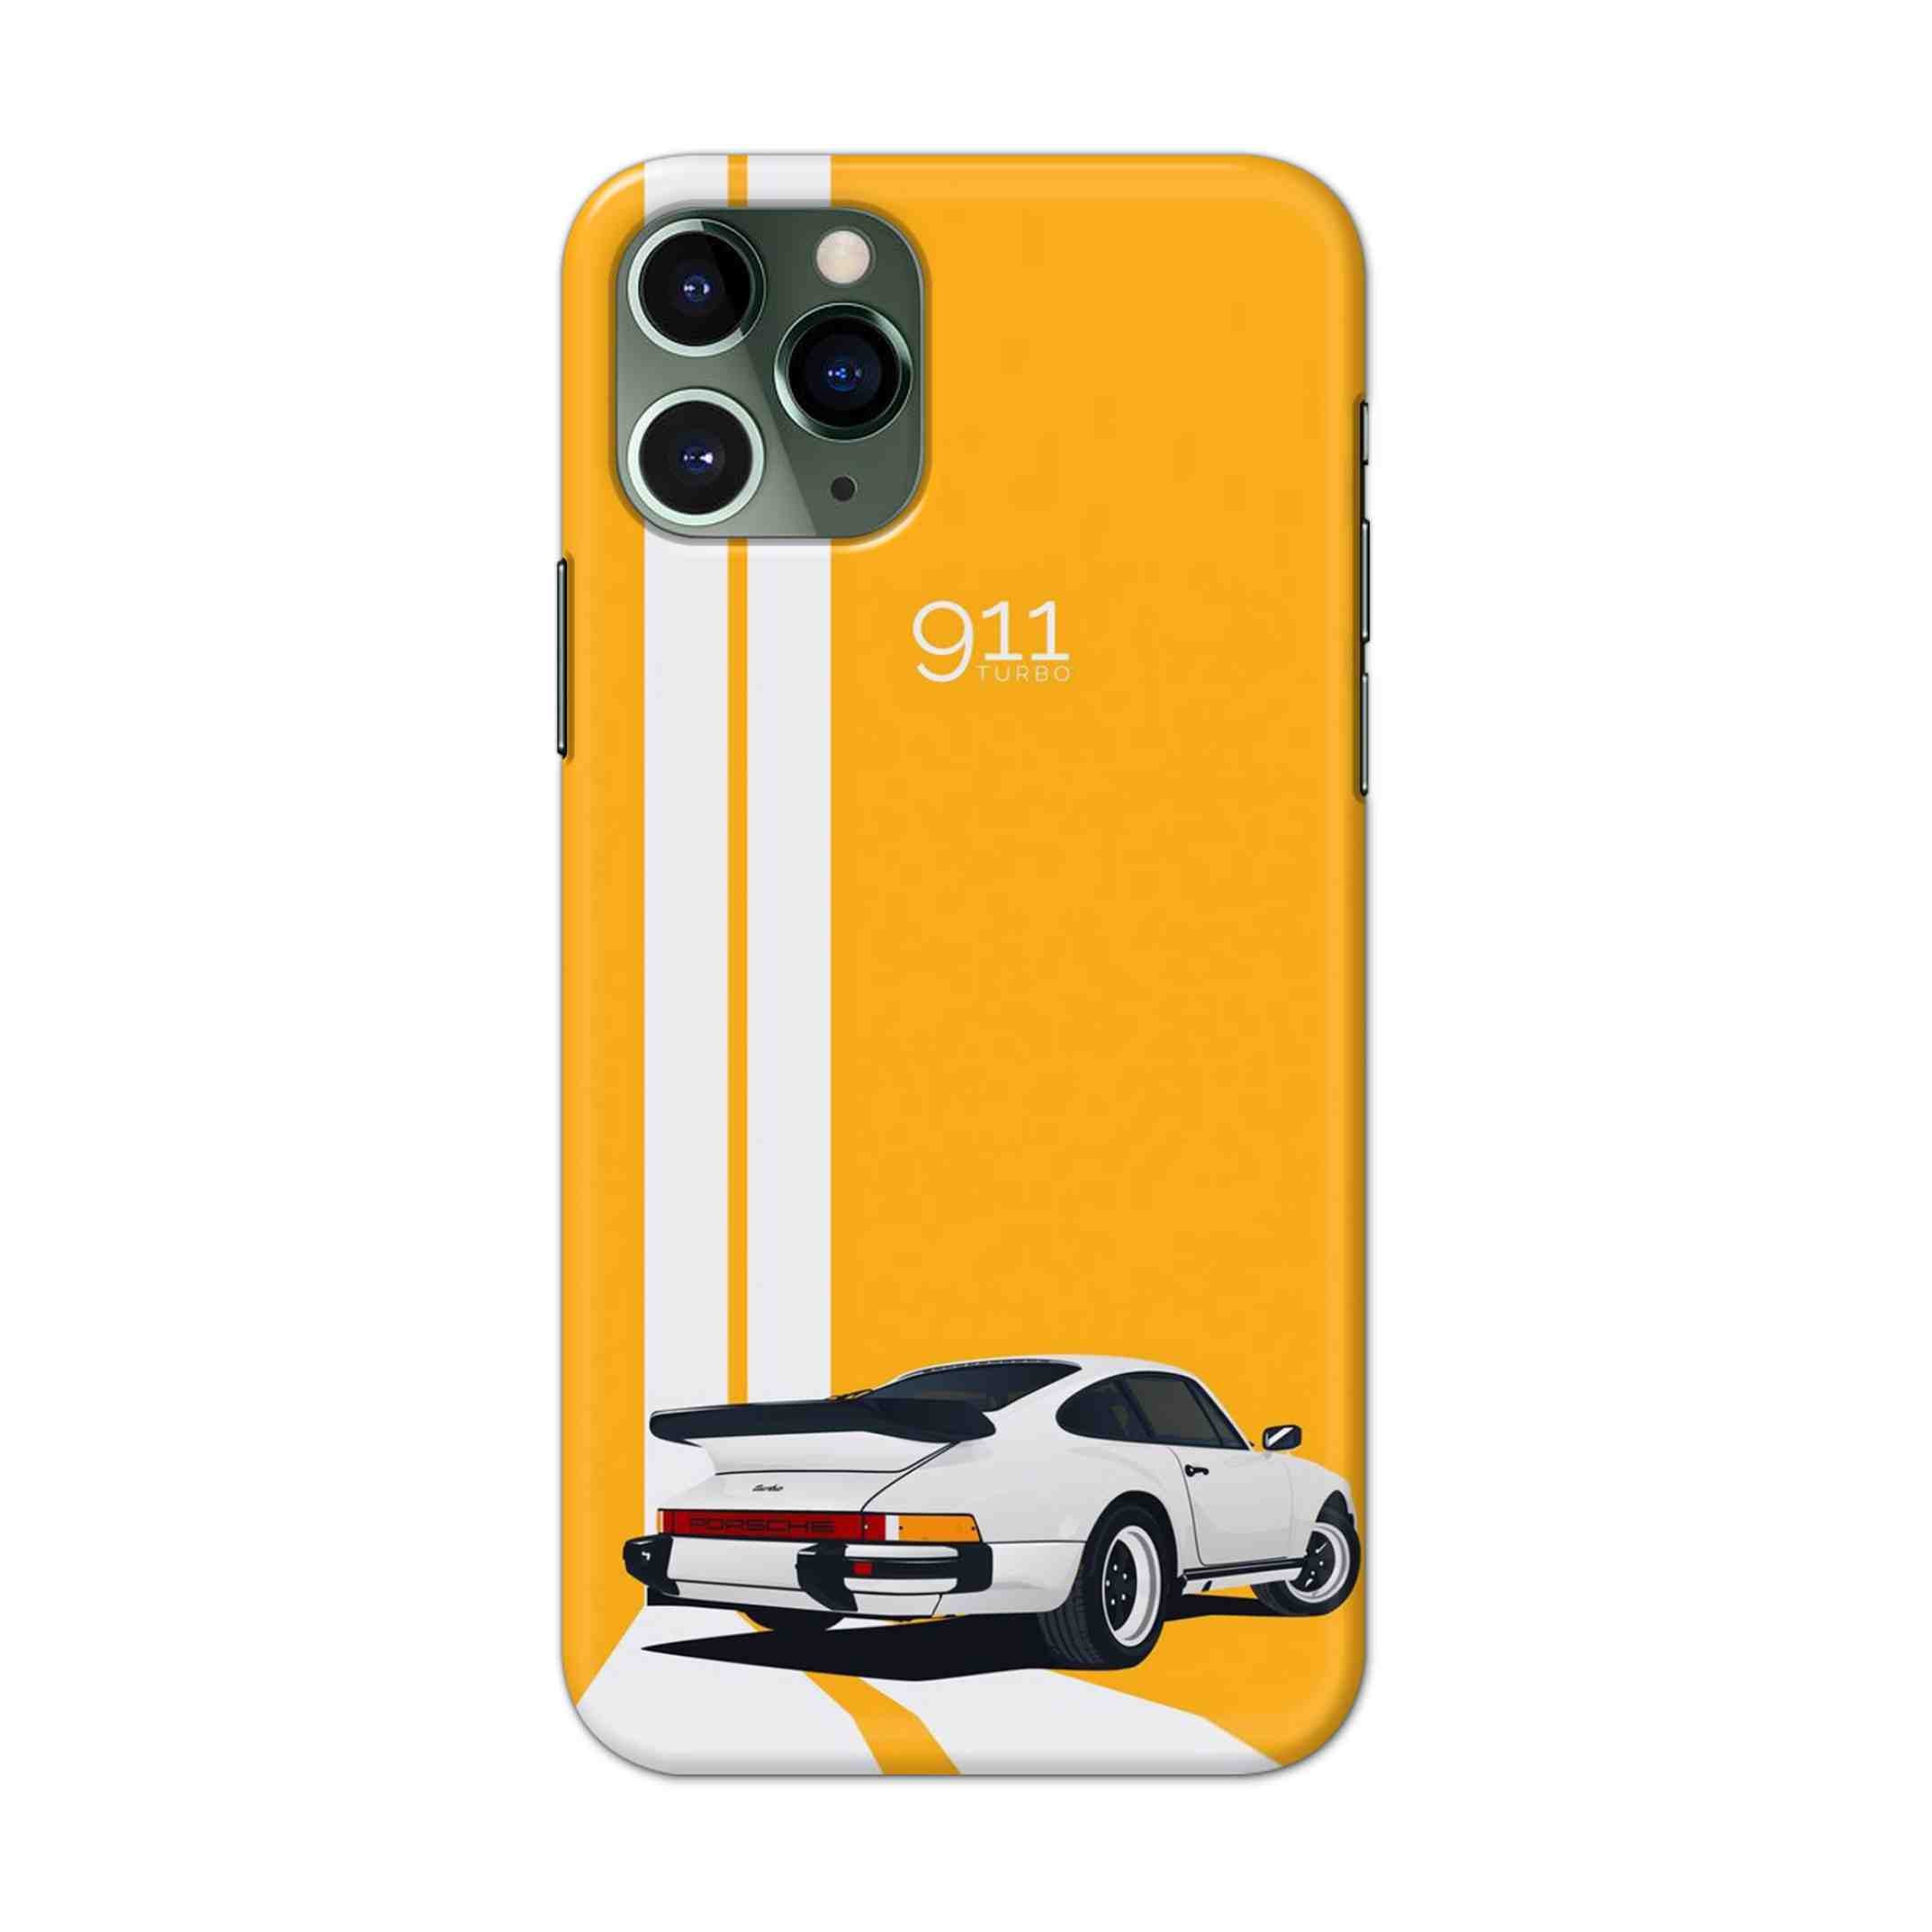 Buy 911 Gt Porche Hard Back Mobile Phone Case/Cover For iPhone 11 Pro Online